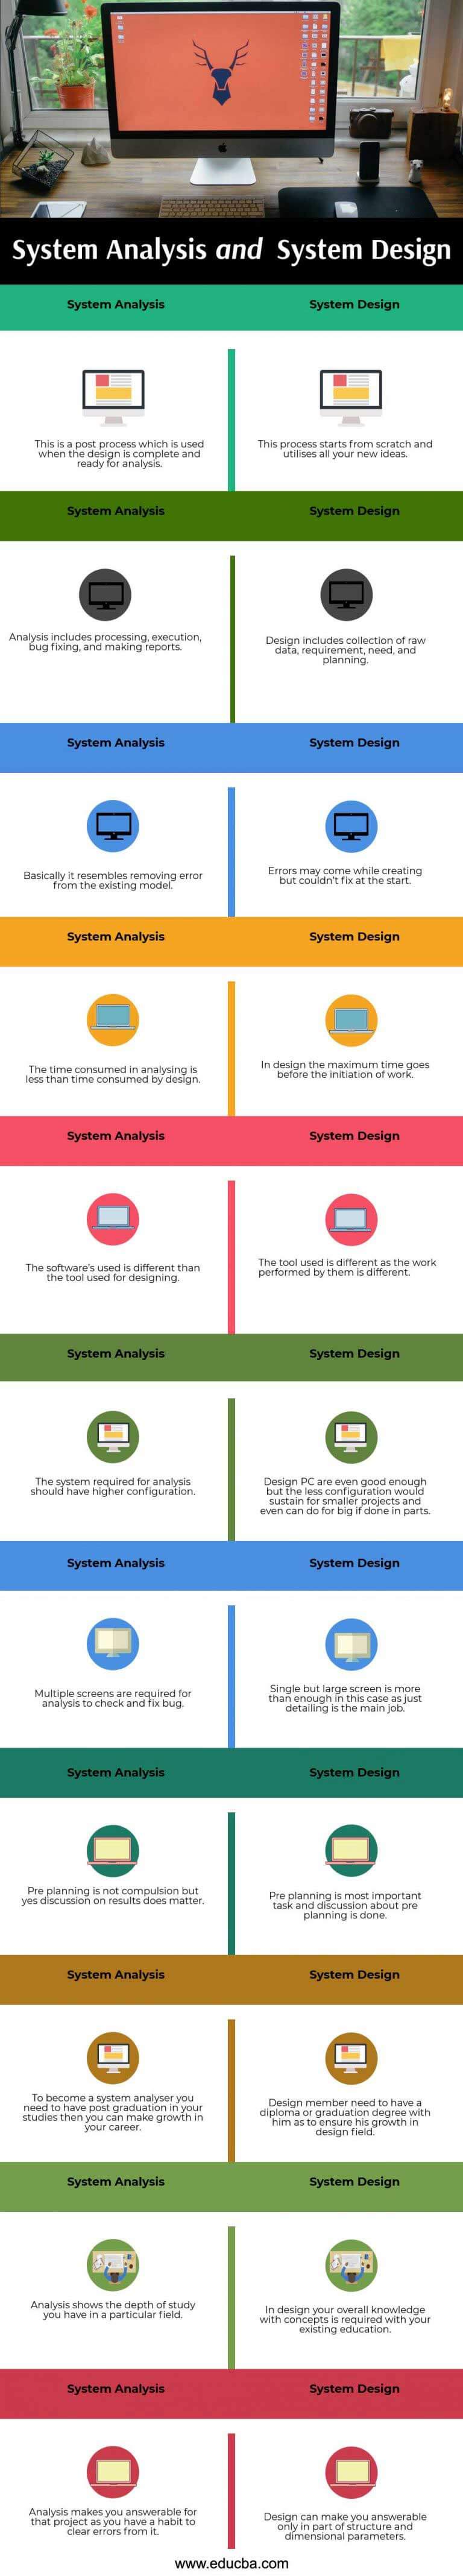 difference between system analysis and system design